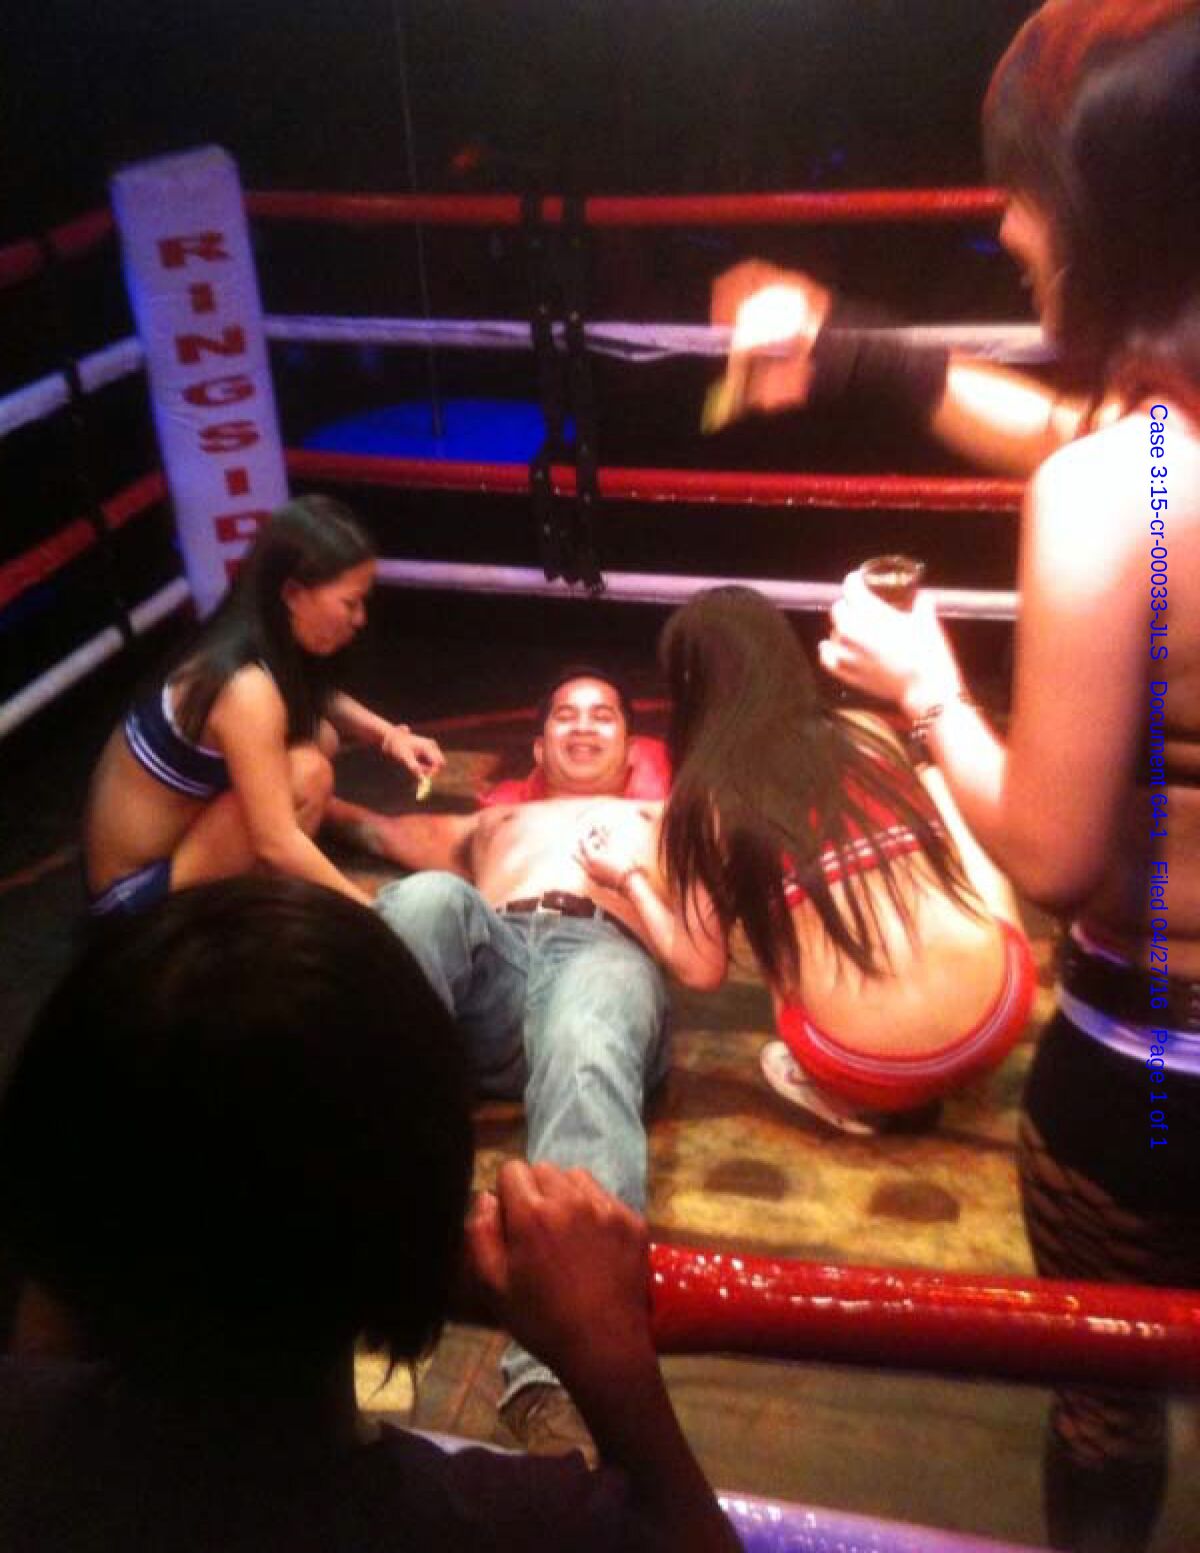 Former Navy Cmdr. Michael Misiewicz lies flat on his back in a boxing ring